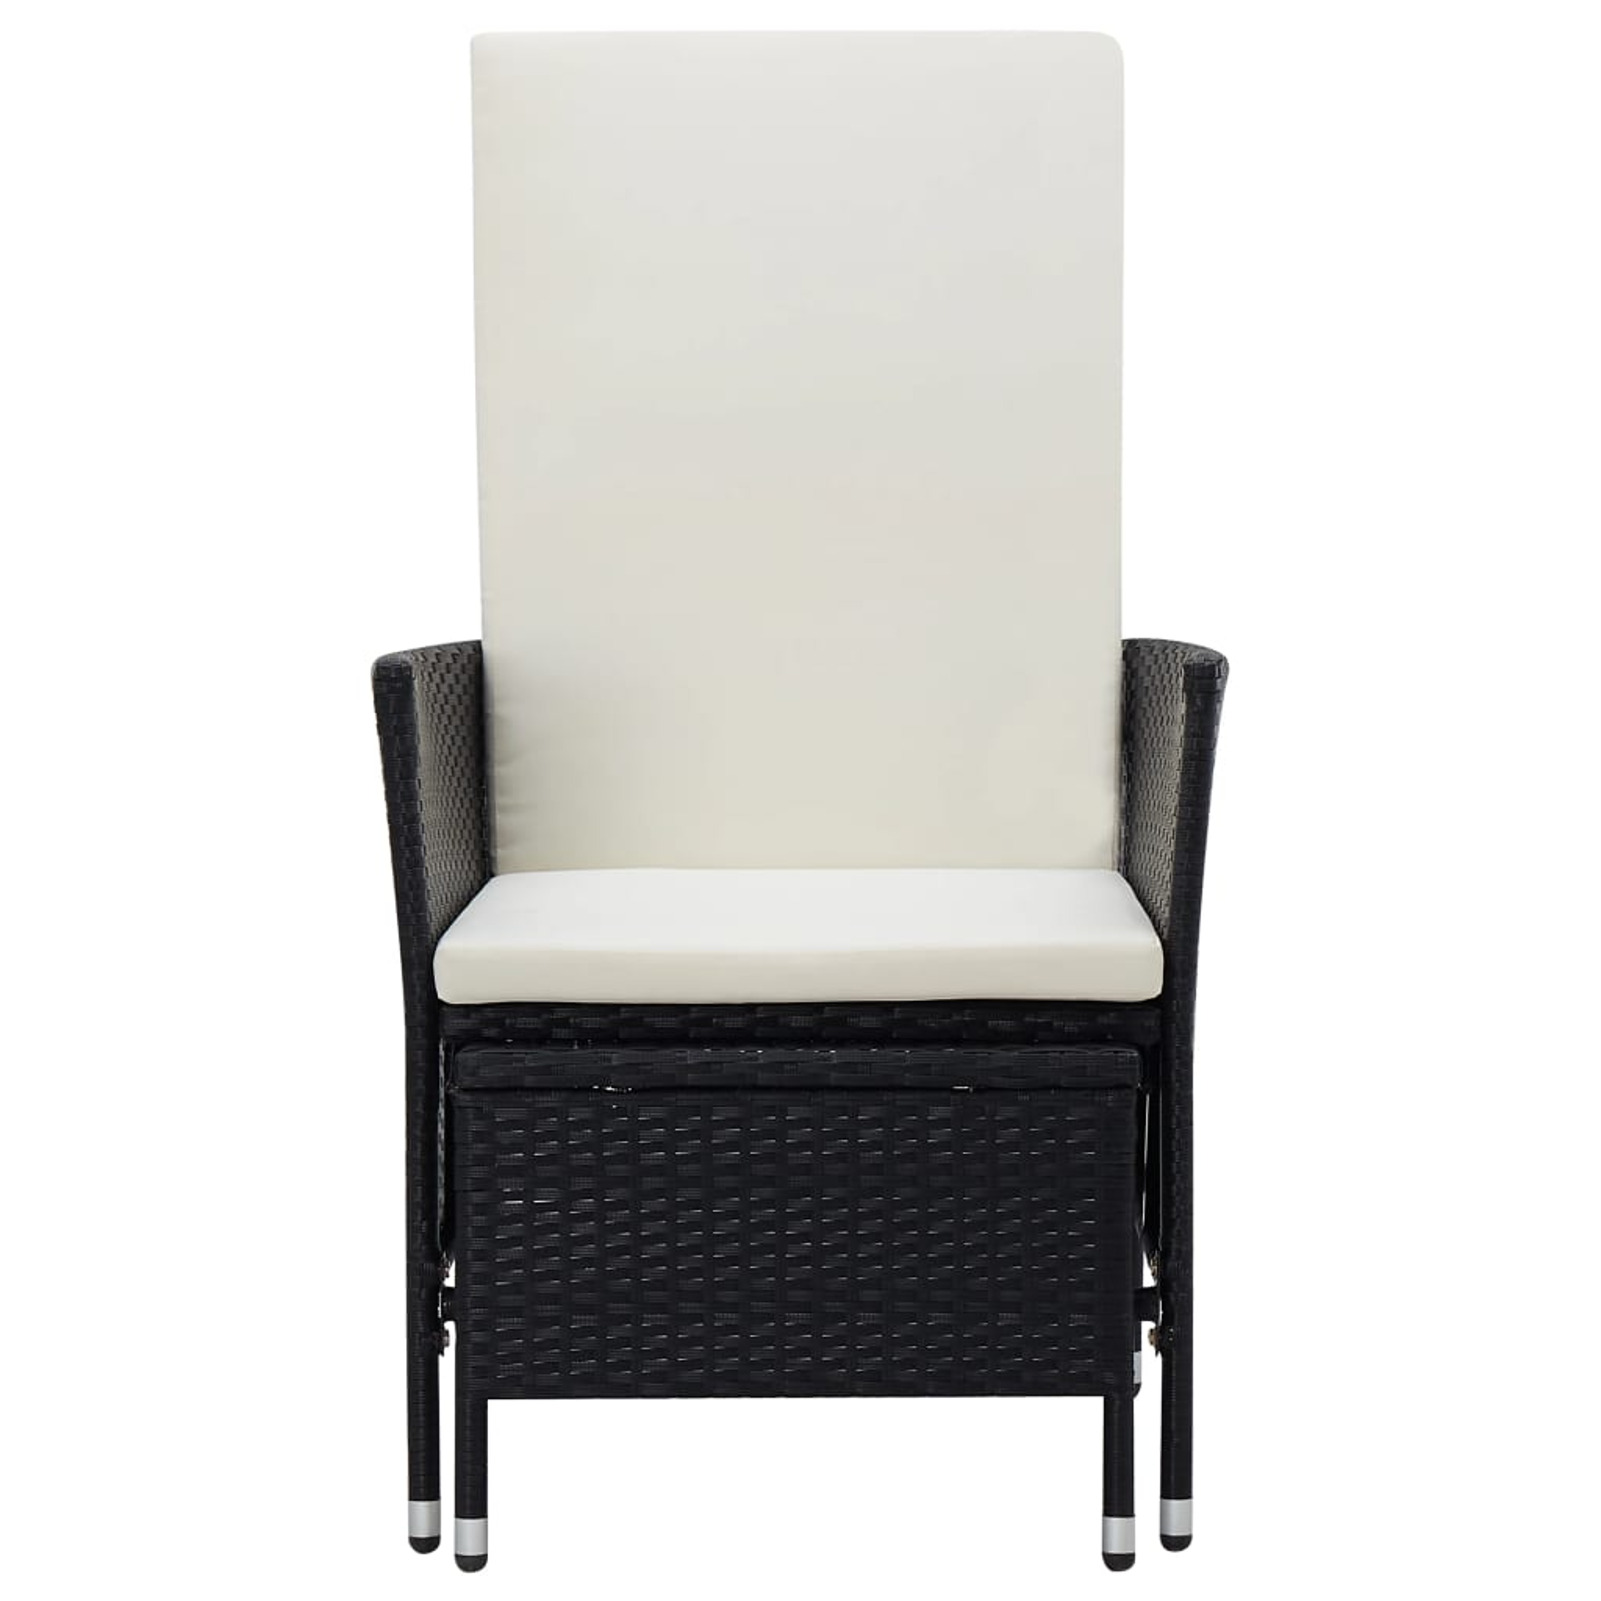 Dcenta Garden Reclining Chair Black Poly Rattan Armchair with Padded Cushions and Built-in Footrest Steel Frame for Patio, Poolside, Backyard, Balcony  Furniture - image 3 of 7